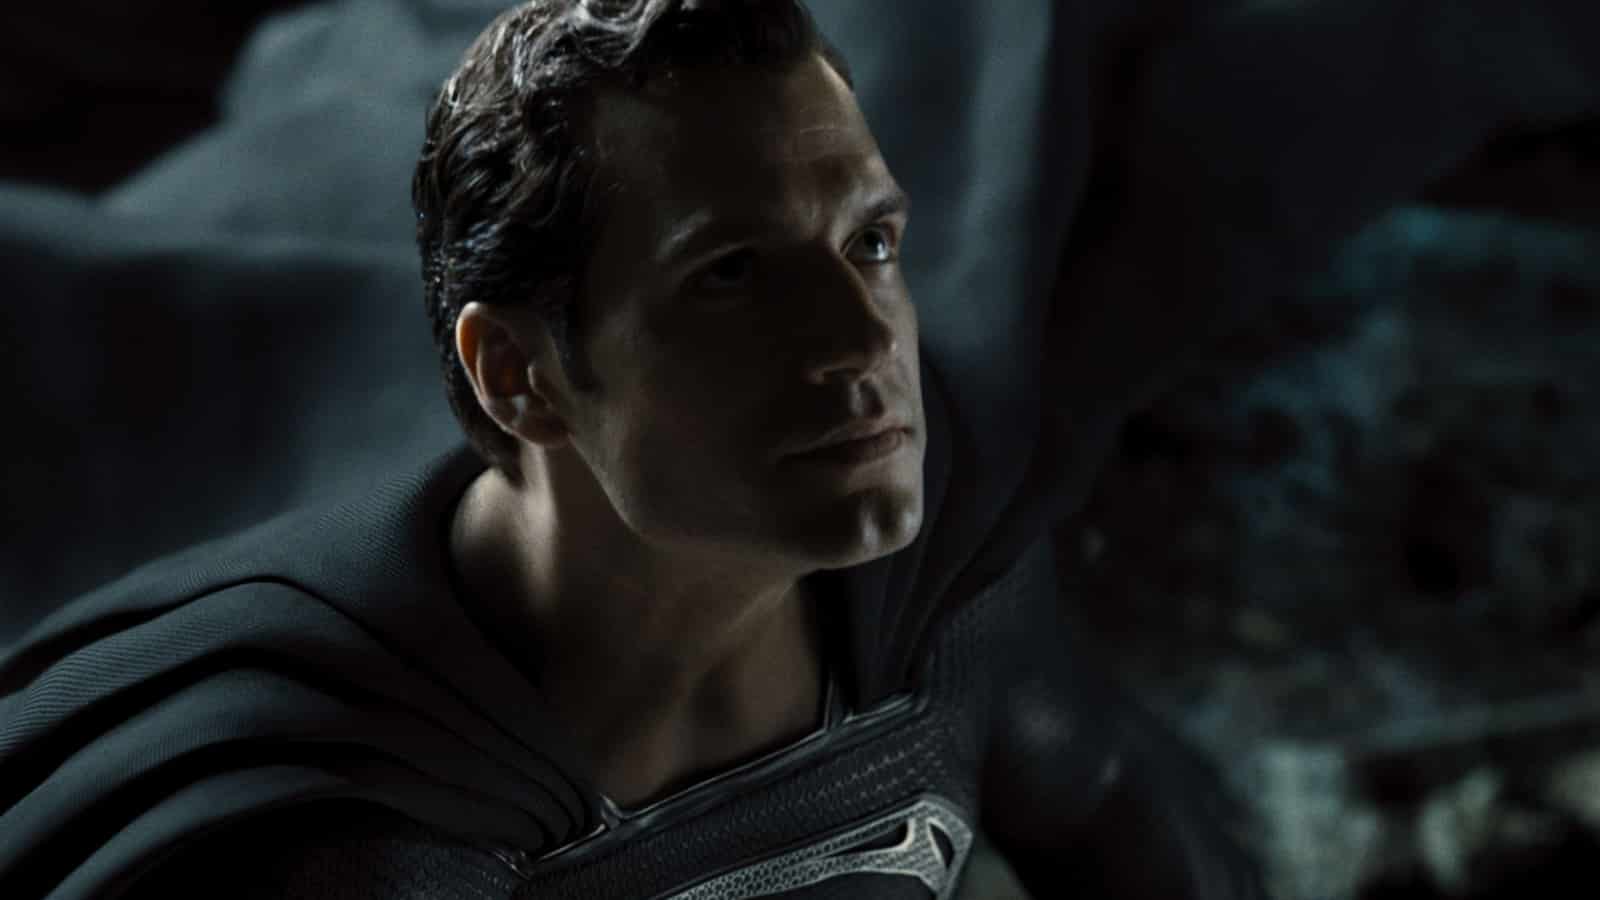 Henry Cavill Rumored To Don Man of Steel Costume in Black Adam Post-Credit  Scene, Has Reportedly Negotiated For Salary Back in June - FandomWire